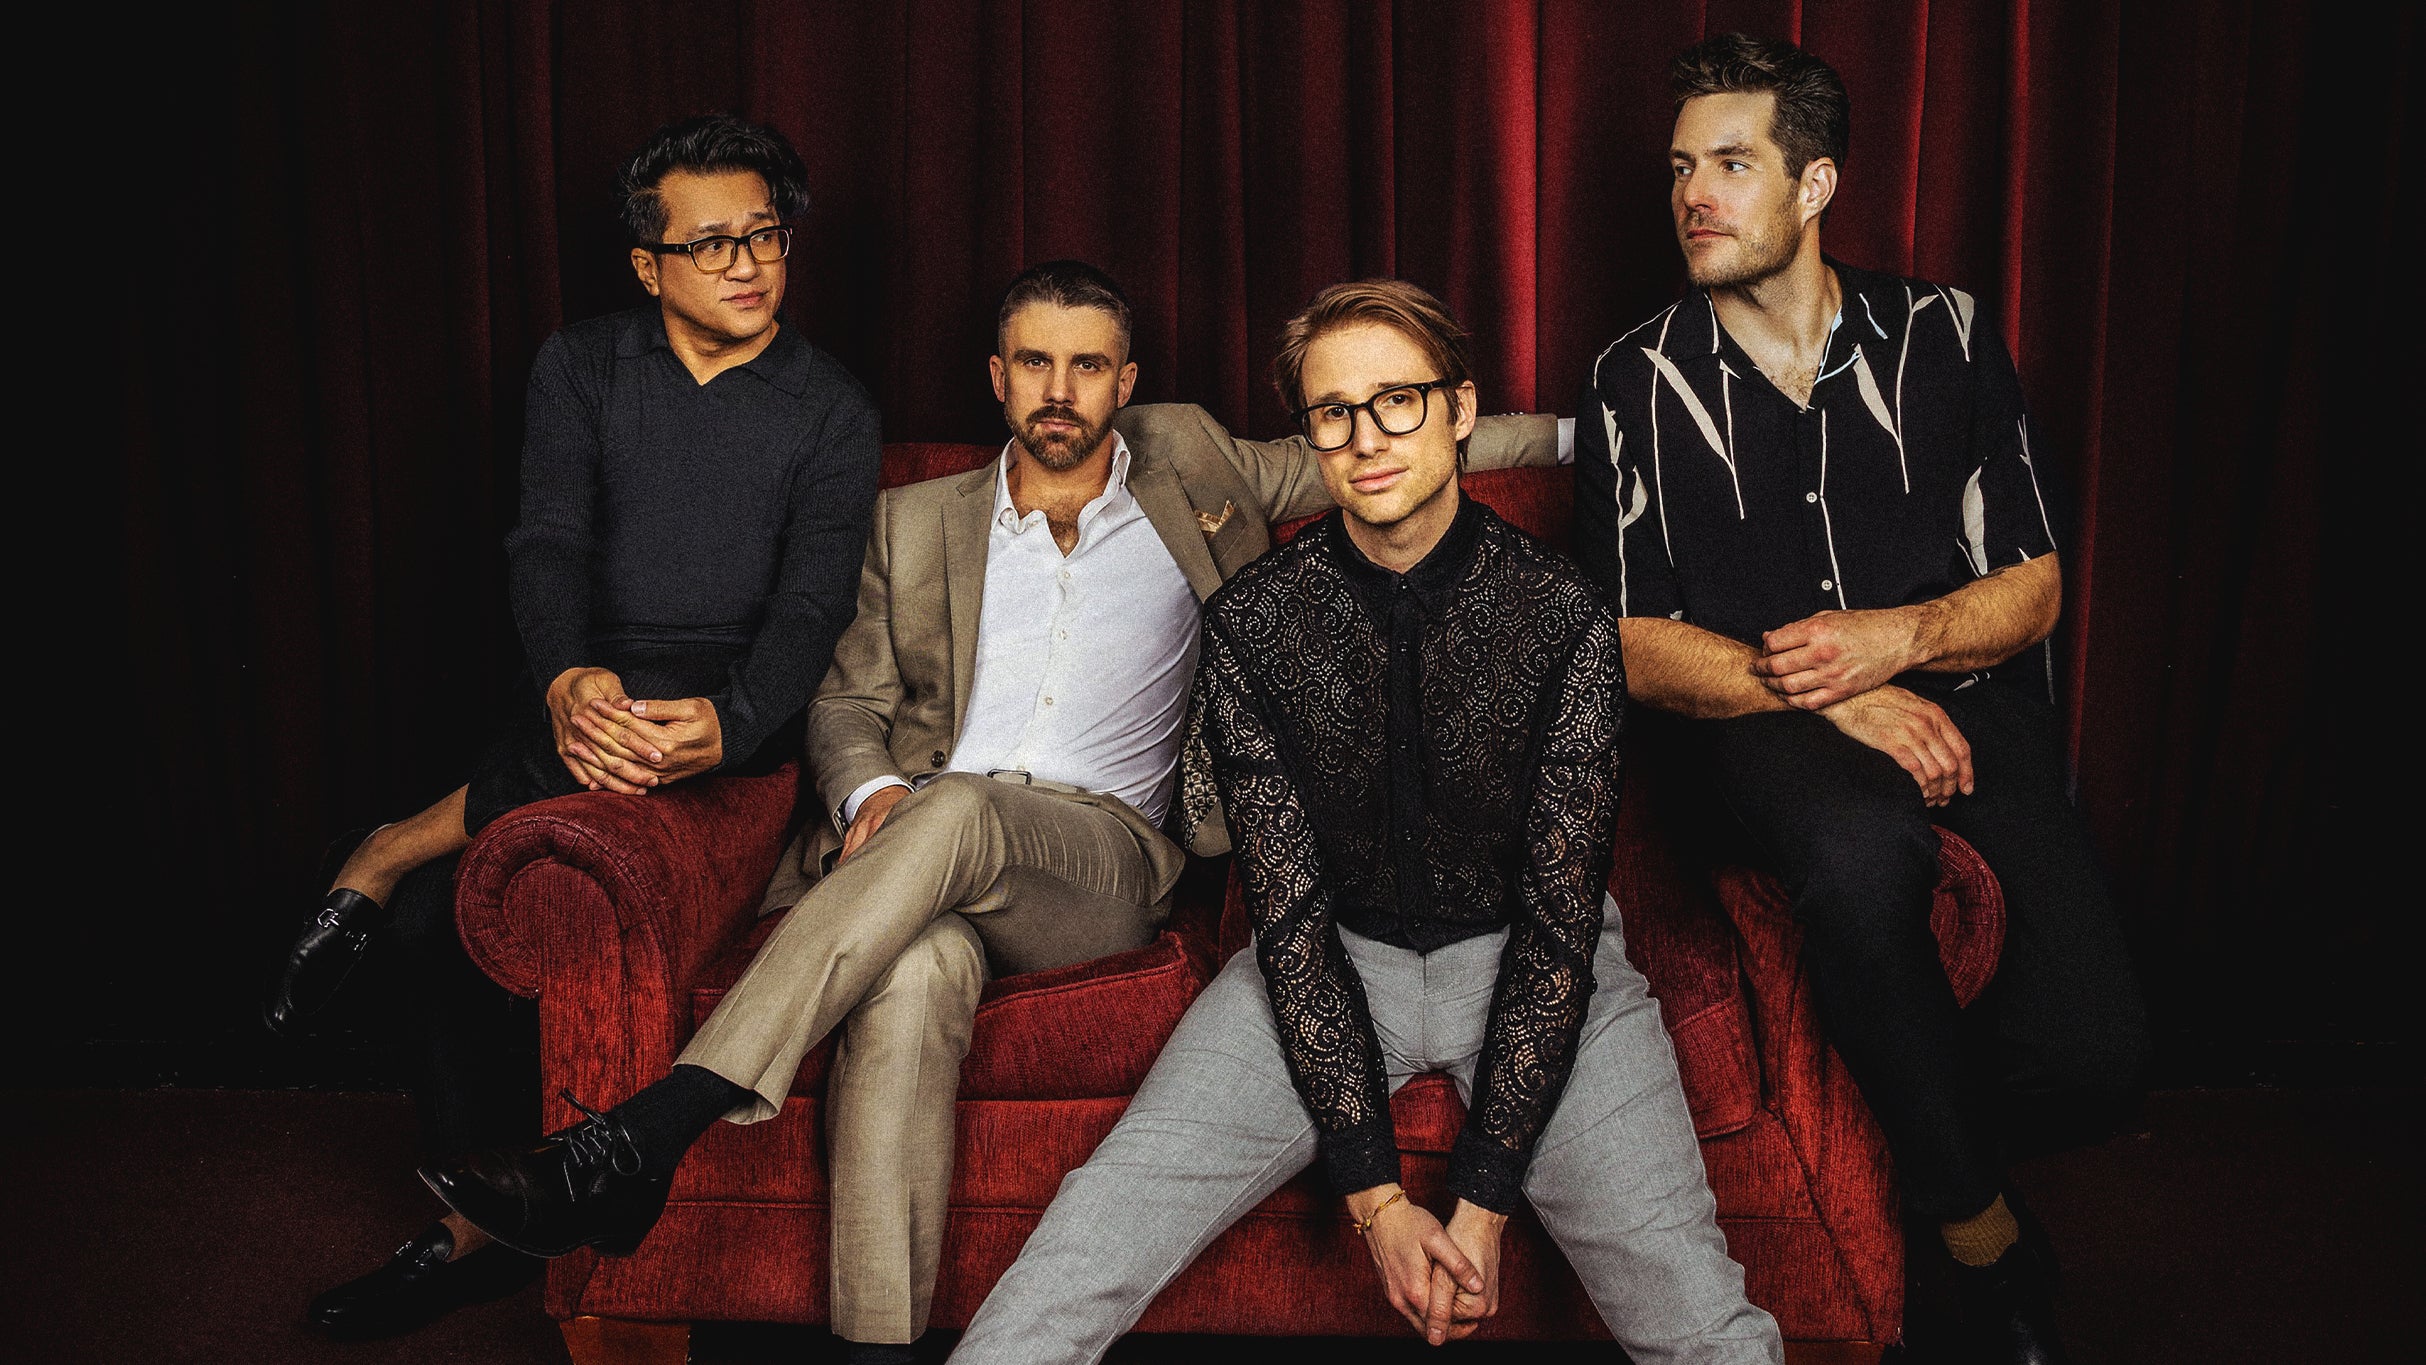 Saint Motel in Manchester promo photo for Priority from O2 presale offer code